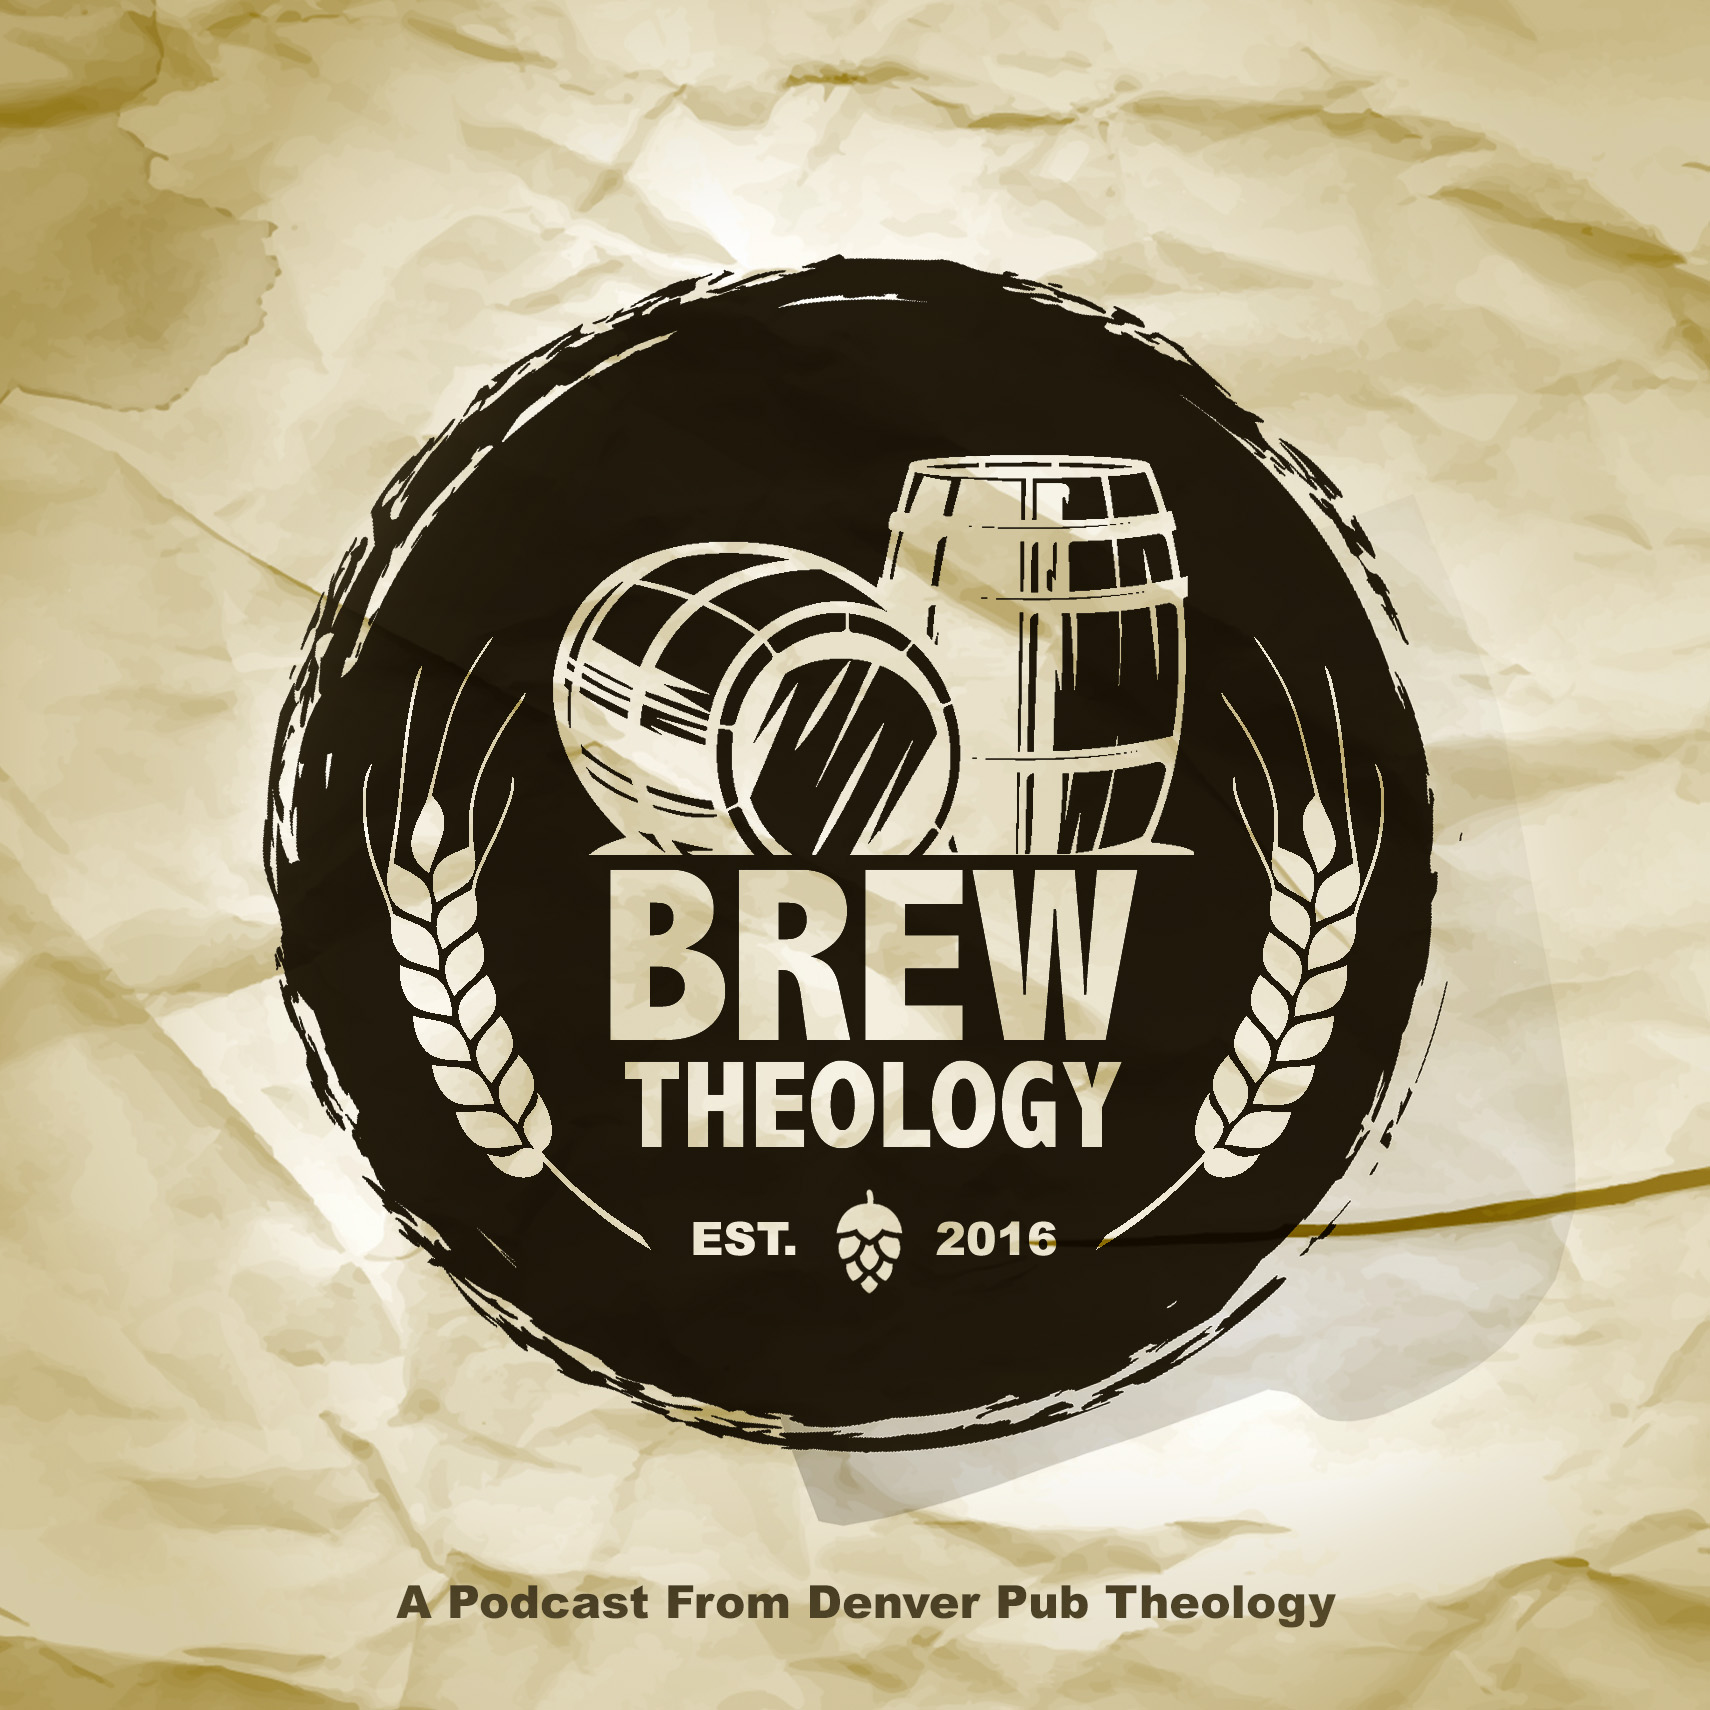 Episode 11: ”Theodicy” - The Problem of Evil, Pain & Suffering